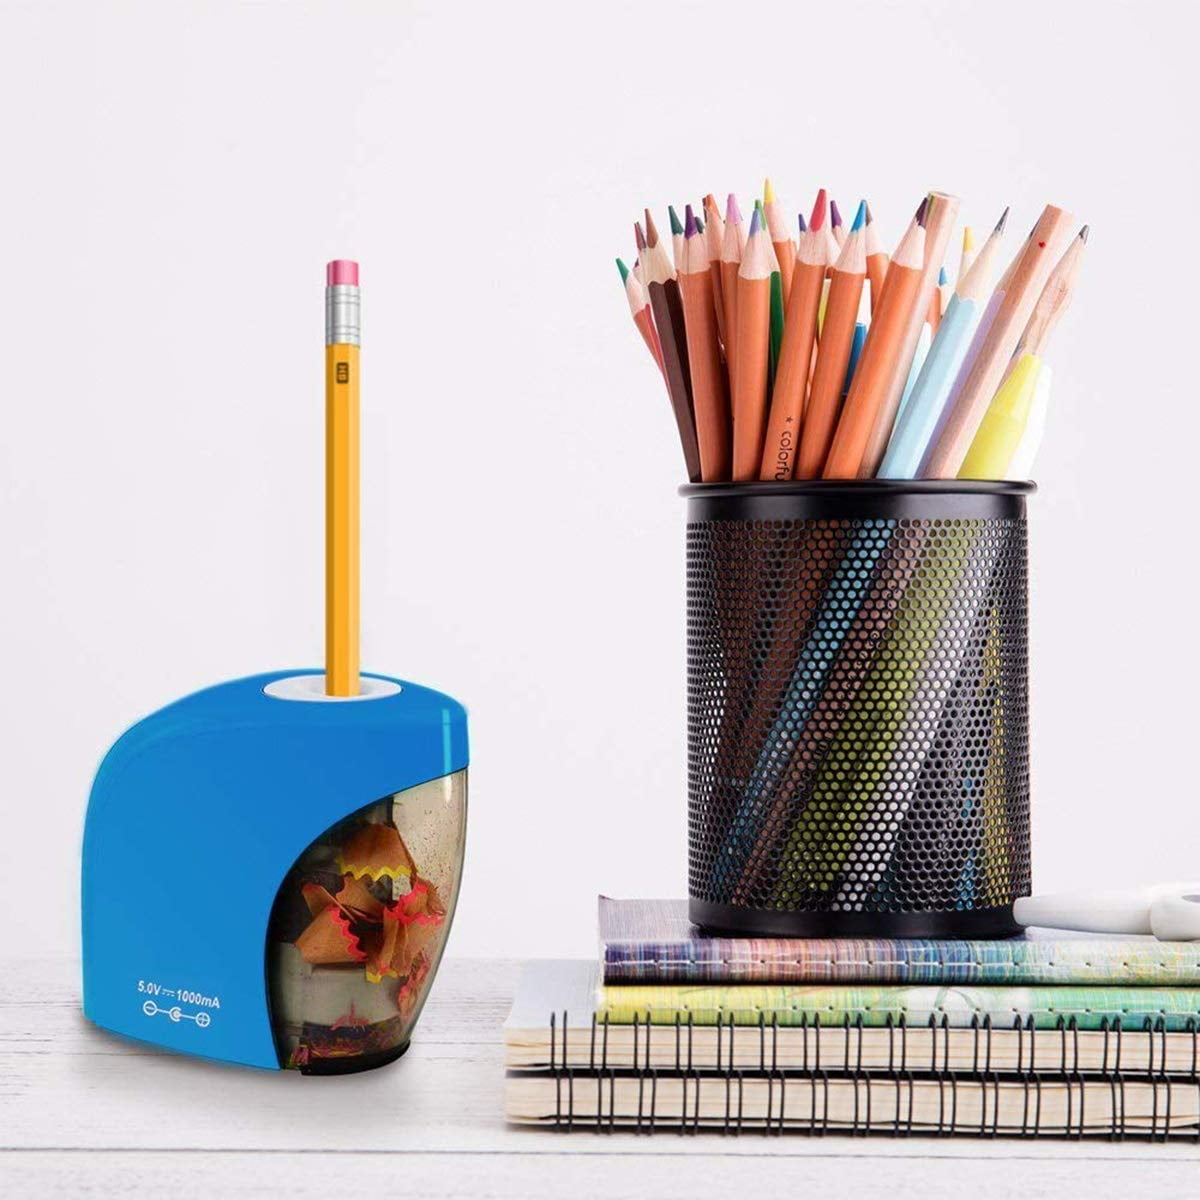 Electric Pencil Sharpener,Electrical Automatic Sharpener for NO.2 Pencils and Colored Pencils,Electric Pencil Sharpener with Auto Stop Feature for Home/School/Classroom/Office,USB and 2AA Batteries